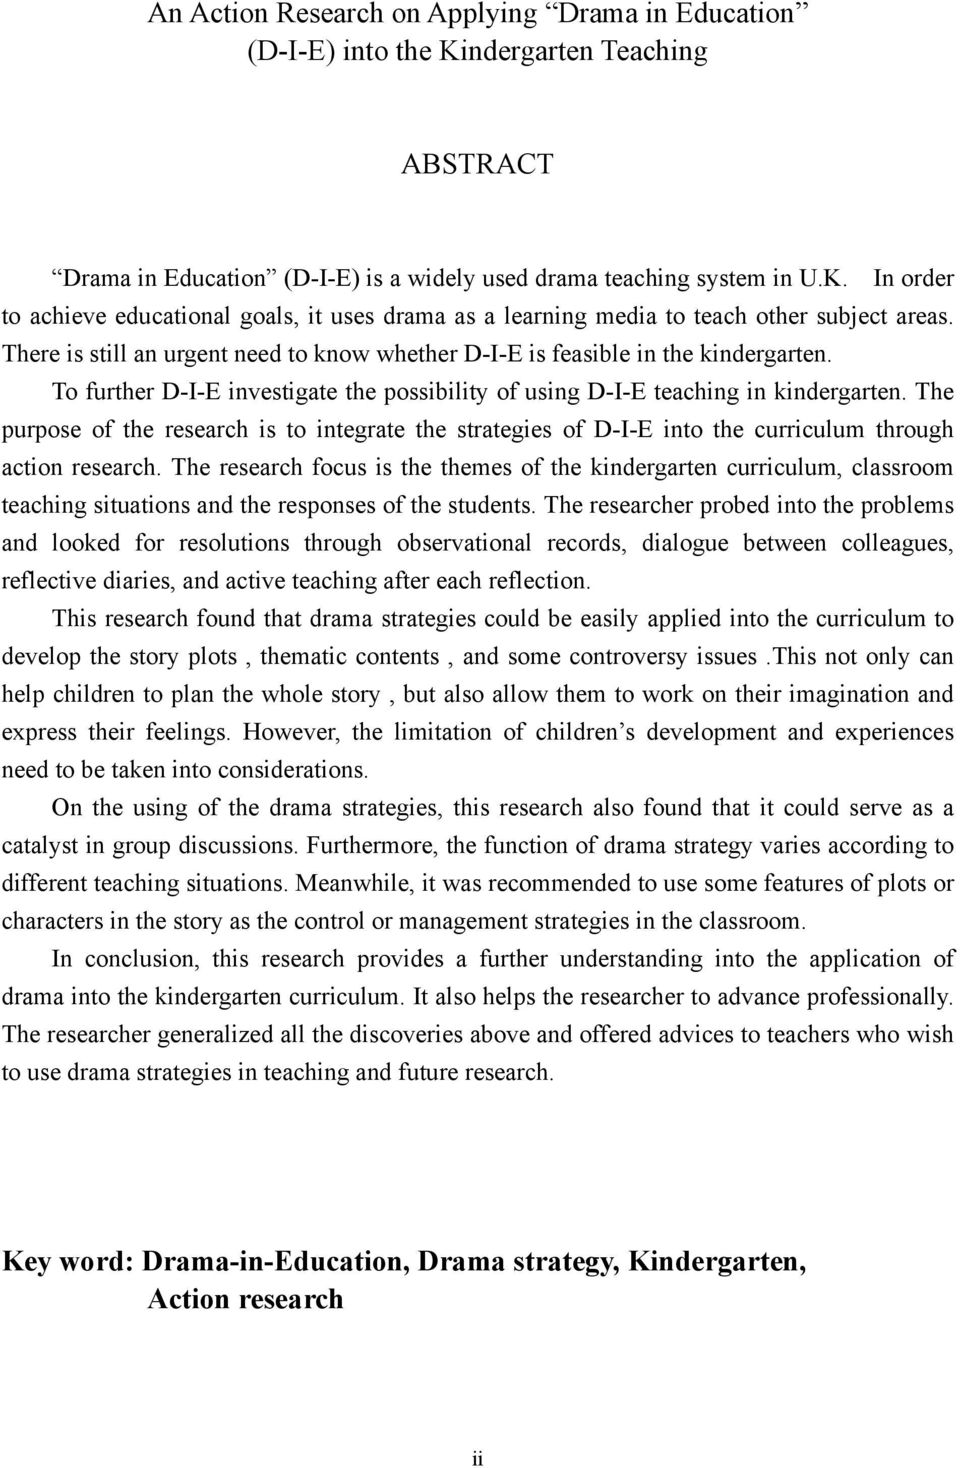 The purpose of the research is to integrate the strategies of D-I-E into the curriculum through action research.